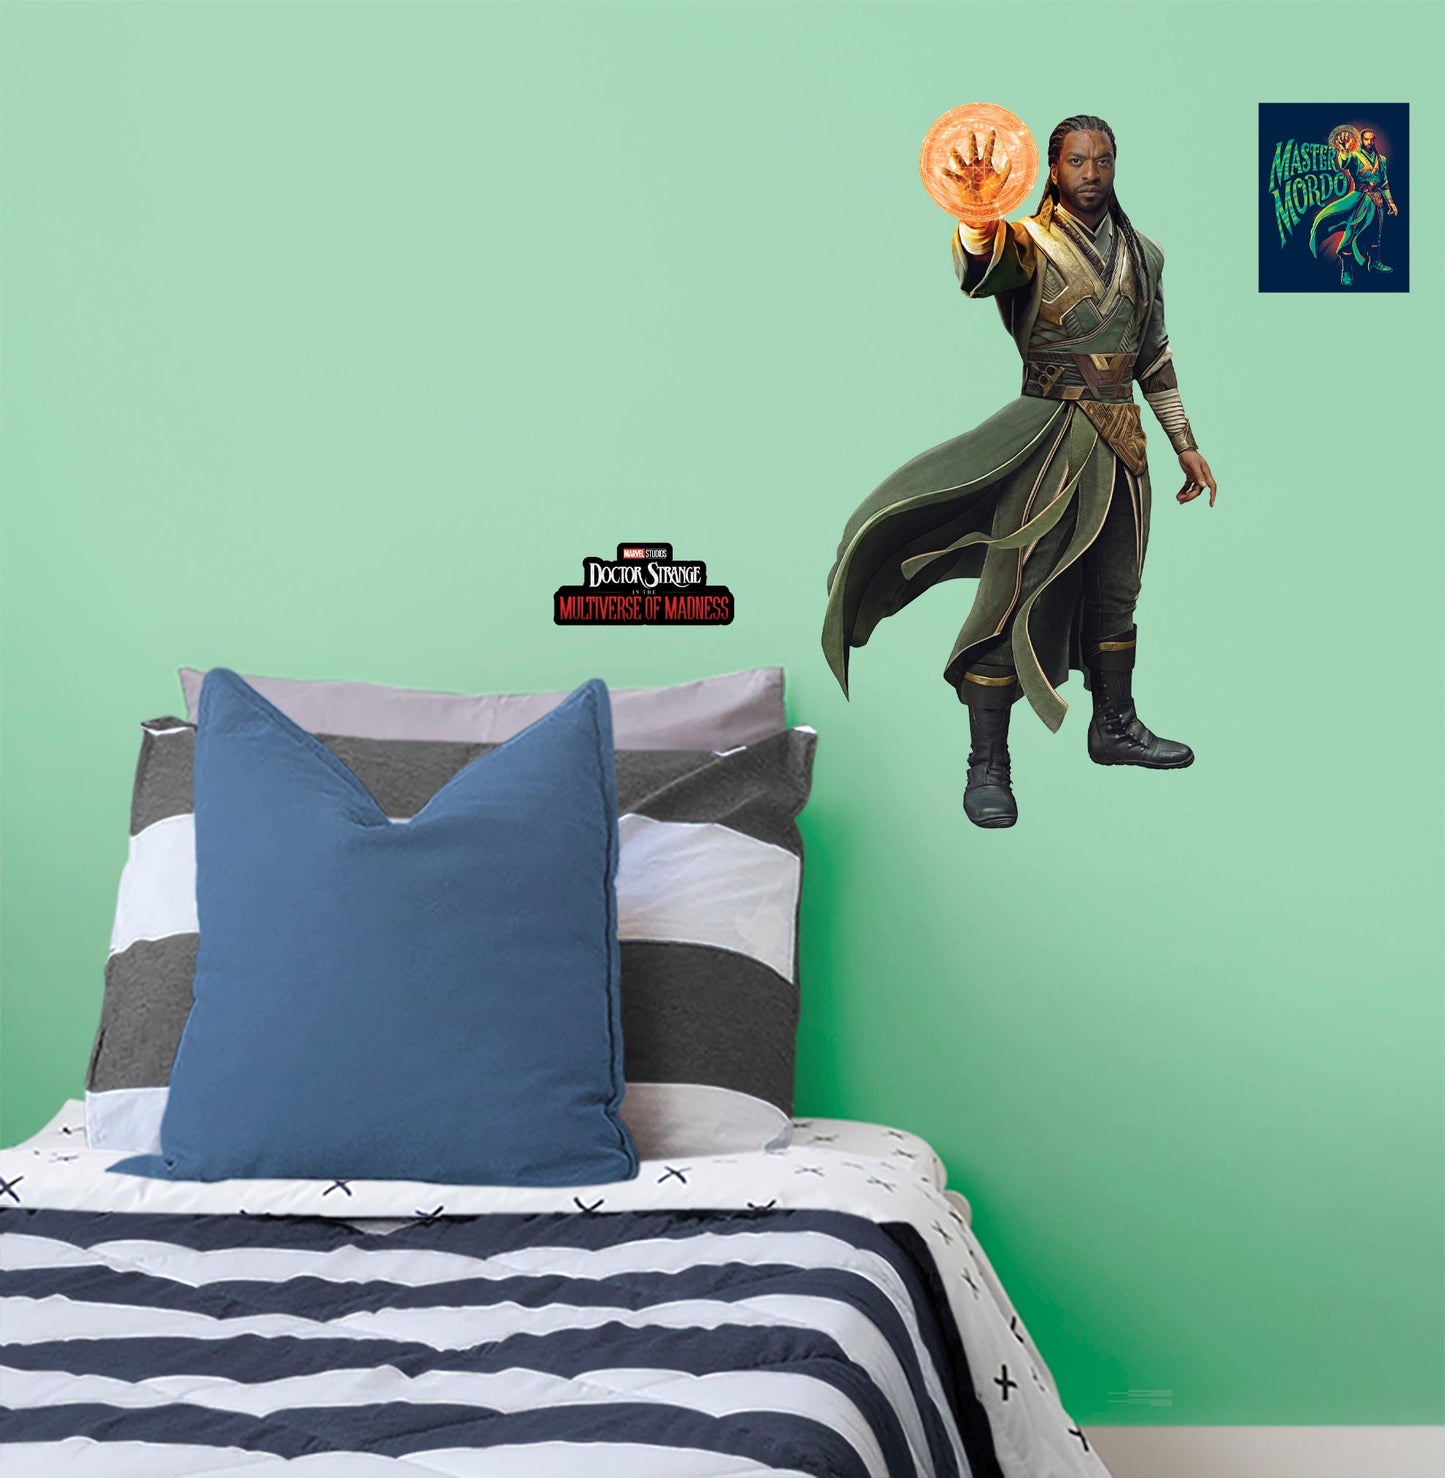 Doctor Strange 2: In the Multiverse of Madness: Master Mordo RealBig - Officially Licensed Marvel Removable Adhesive Decal